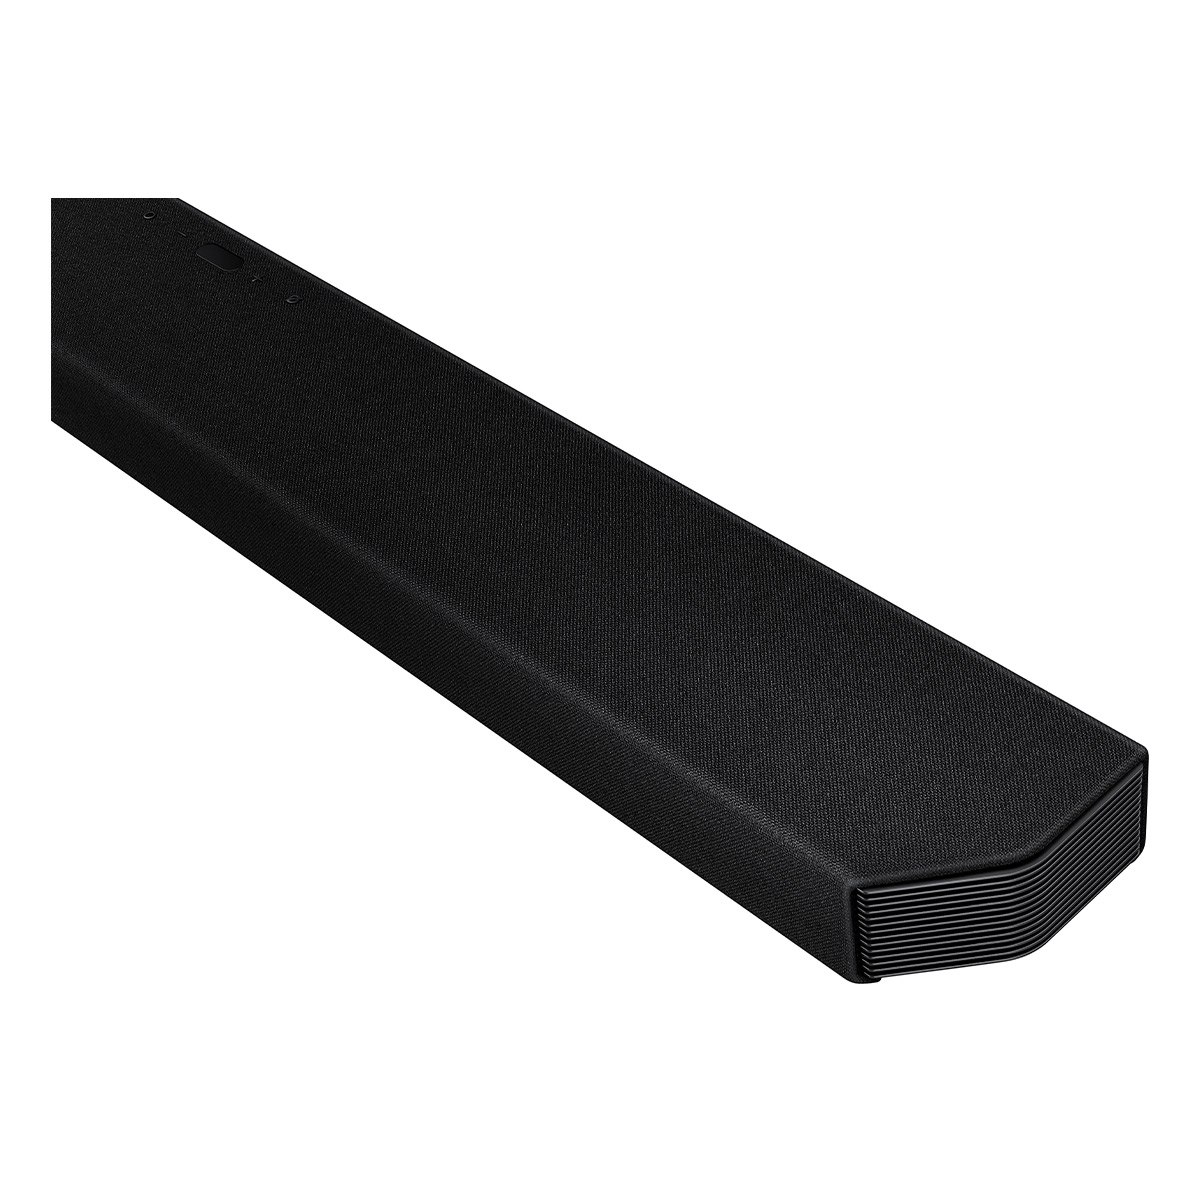 Samsung HW-Q950A 11.1.4ch Soundbar with Dolby Atmos and DTS:X - image 4 of 12